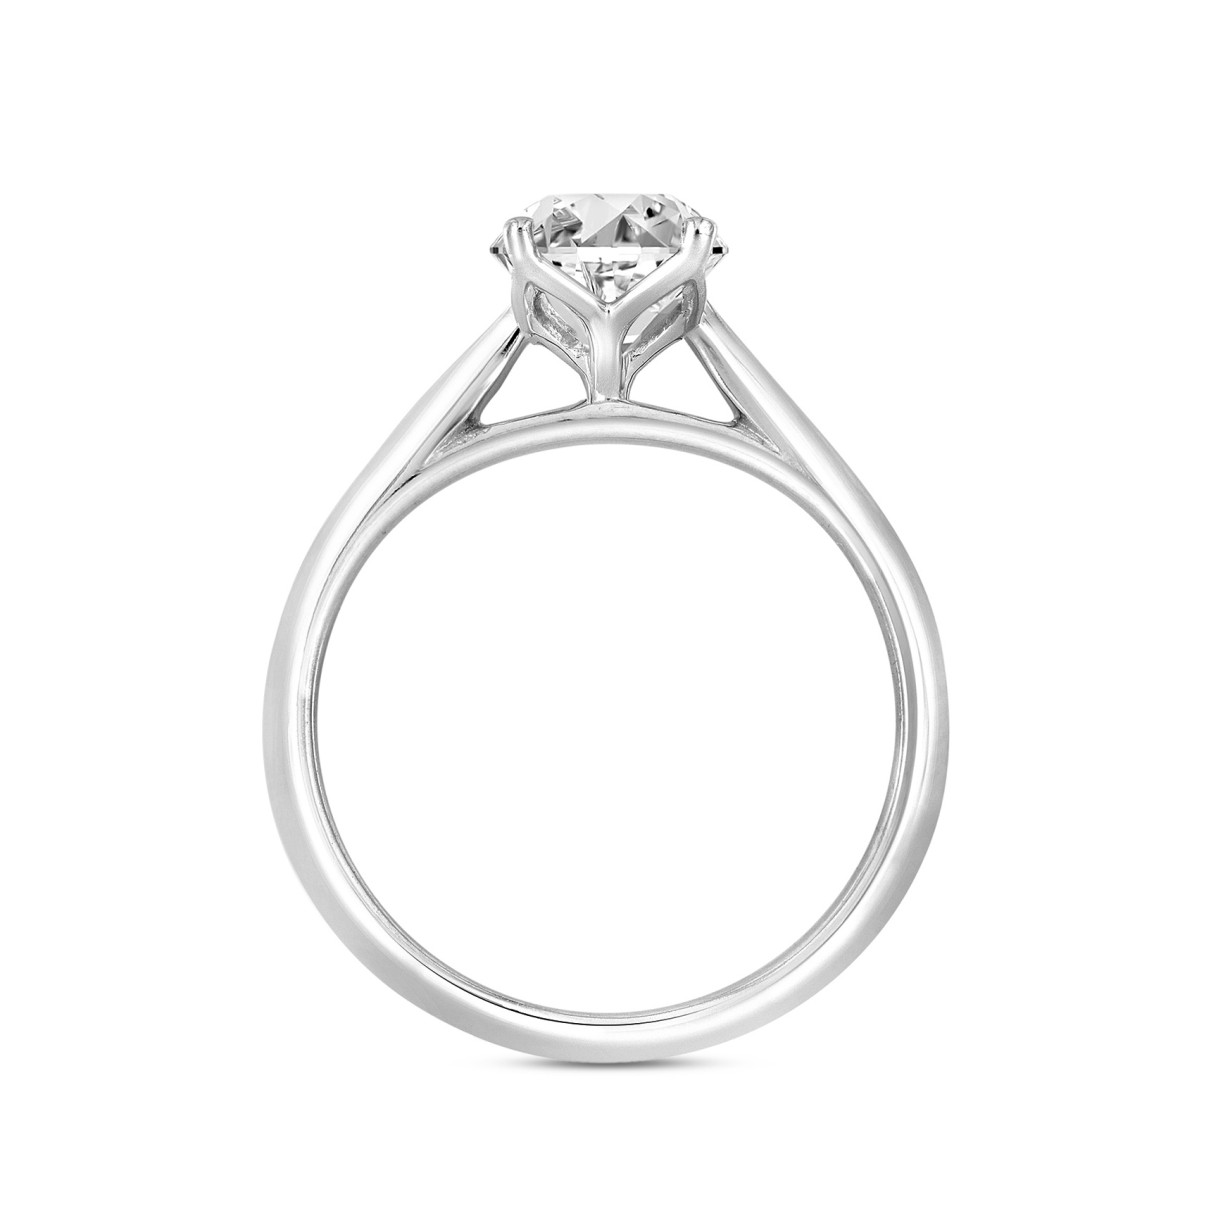 LADIES SOLITAIRE RING 1 1/2CT OVAL DIAMOND 14K WHITE GOLD